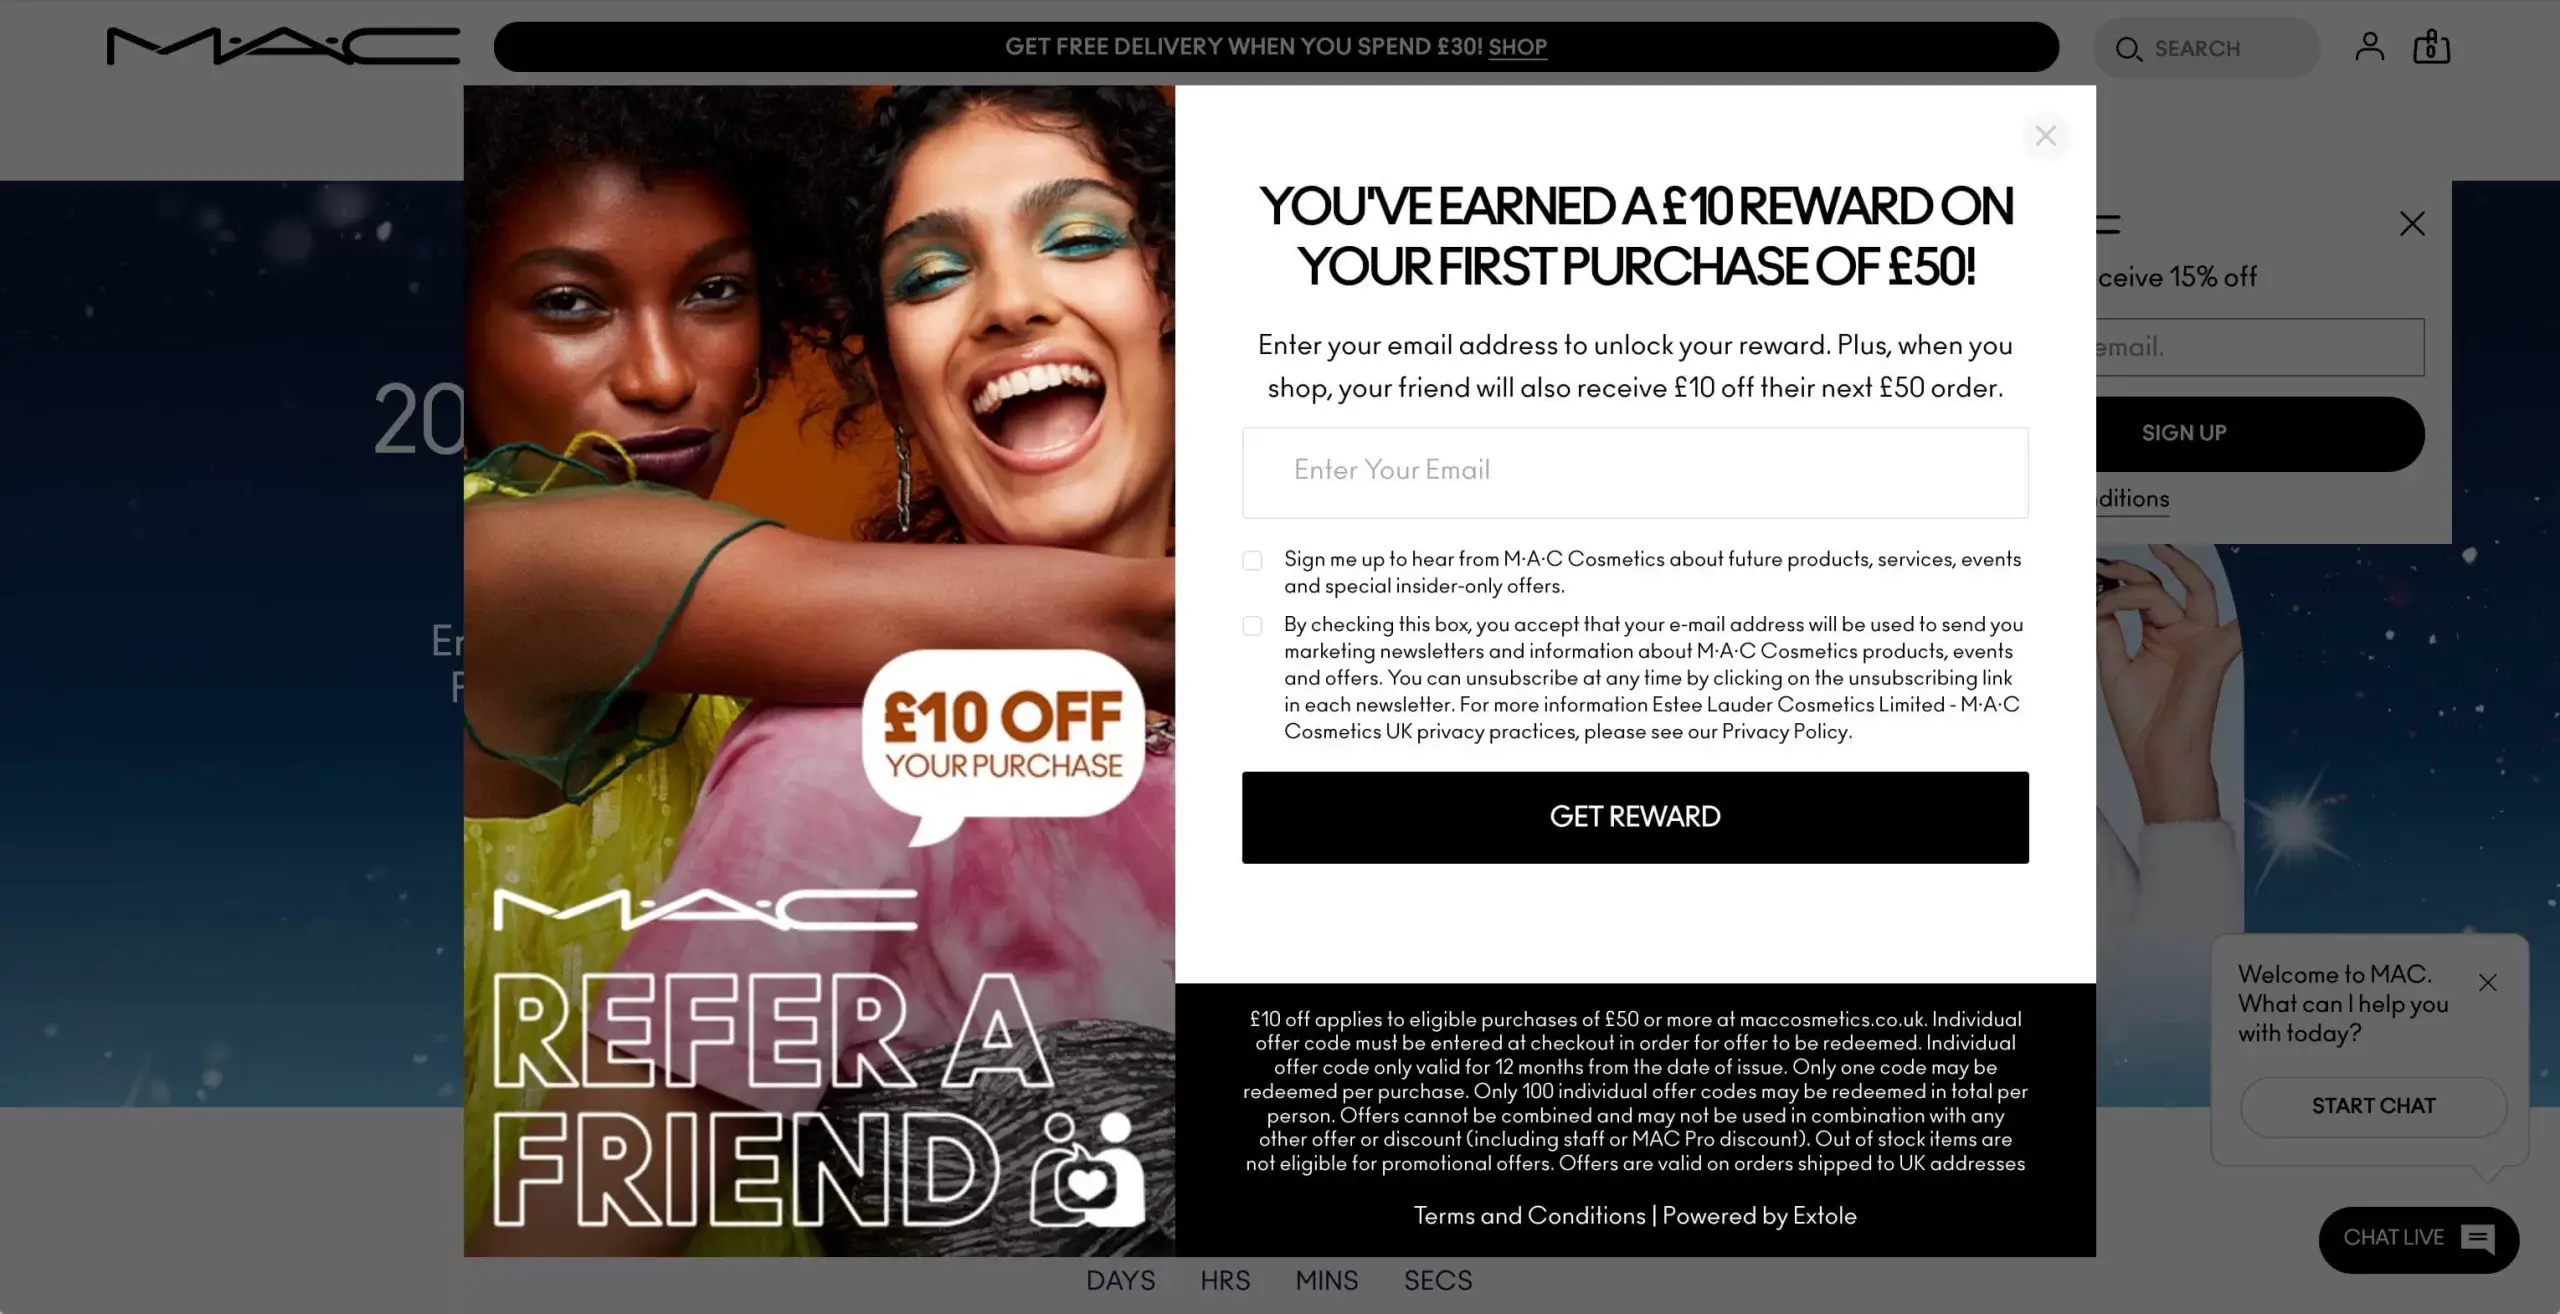 MAC referral code discount for £10 off over £50 spend